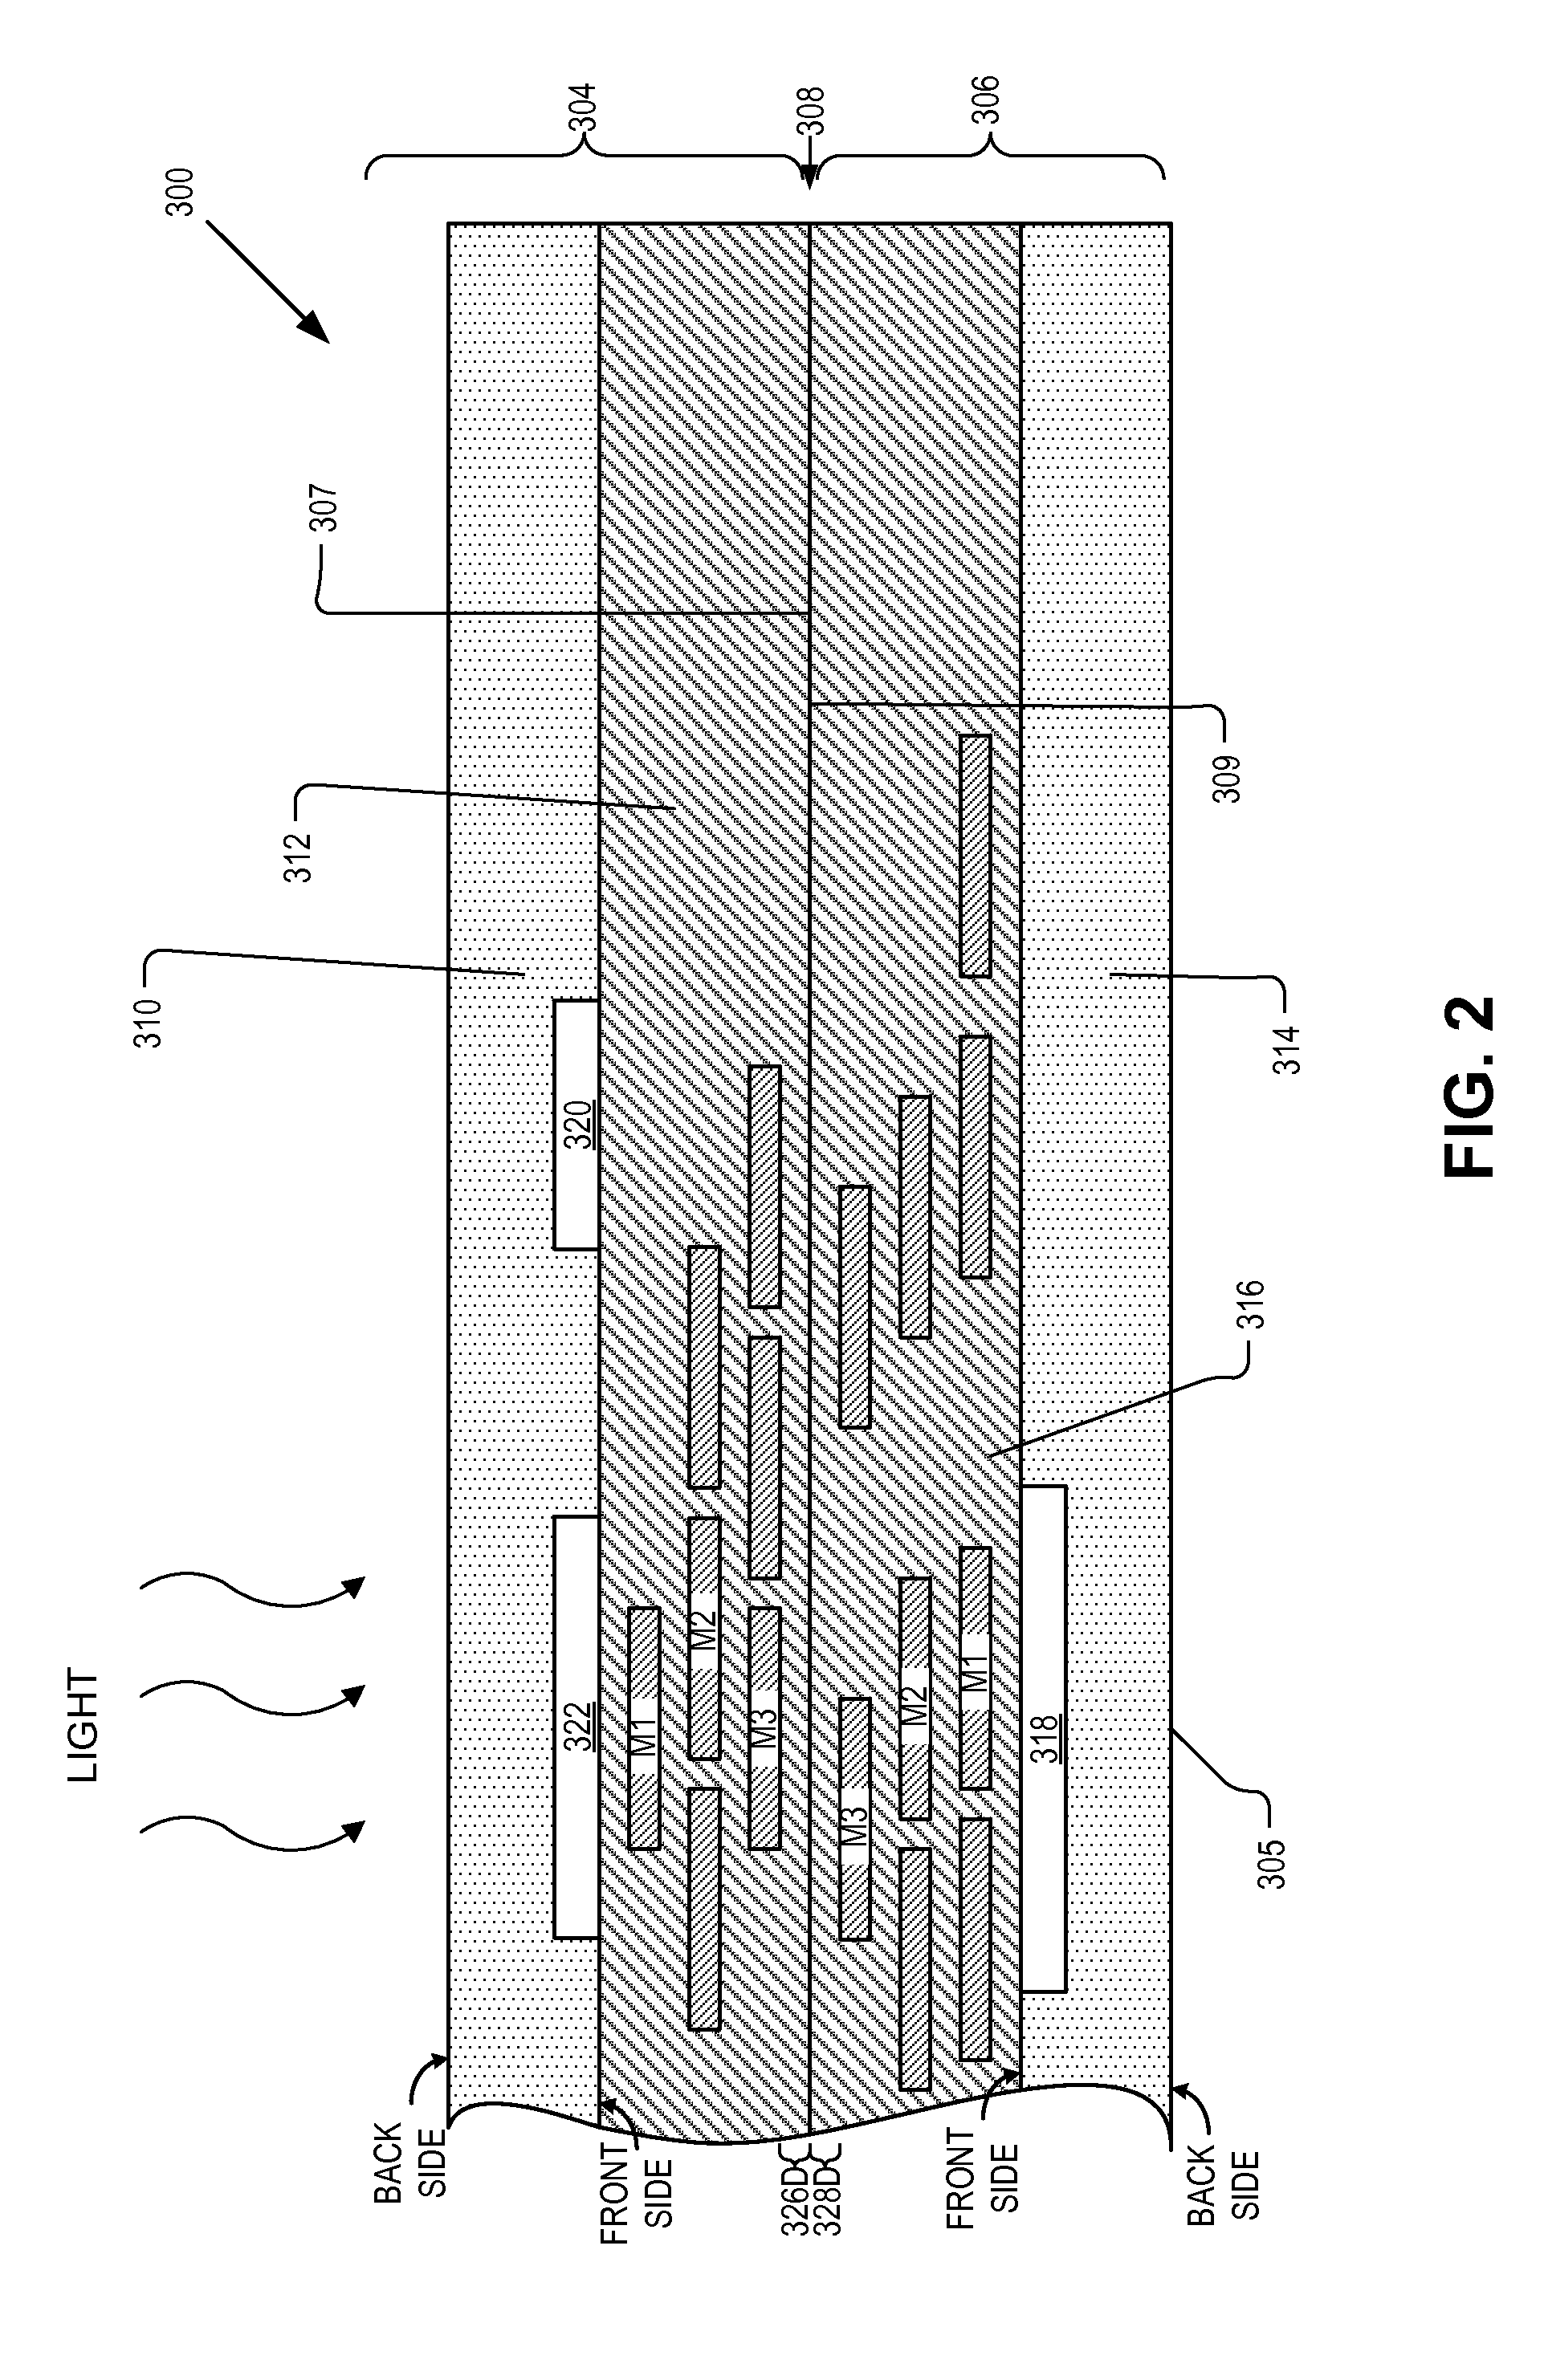 Stacked chip image sensor with light-sensitive circuit elements on the bottom chip